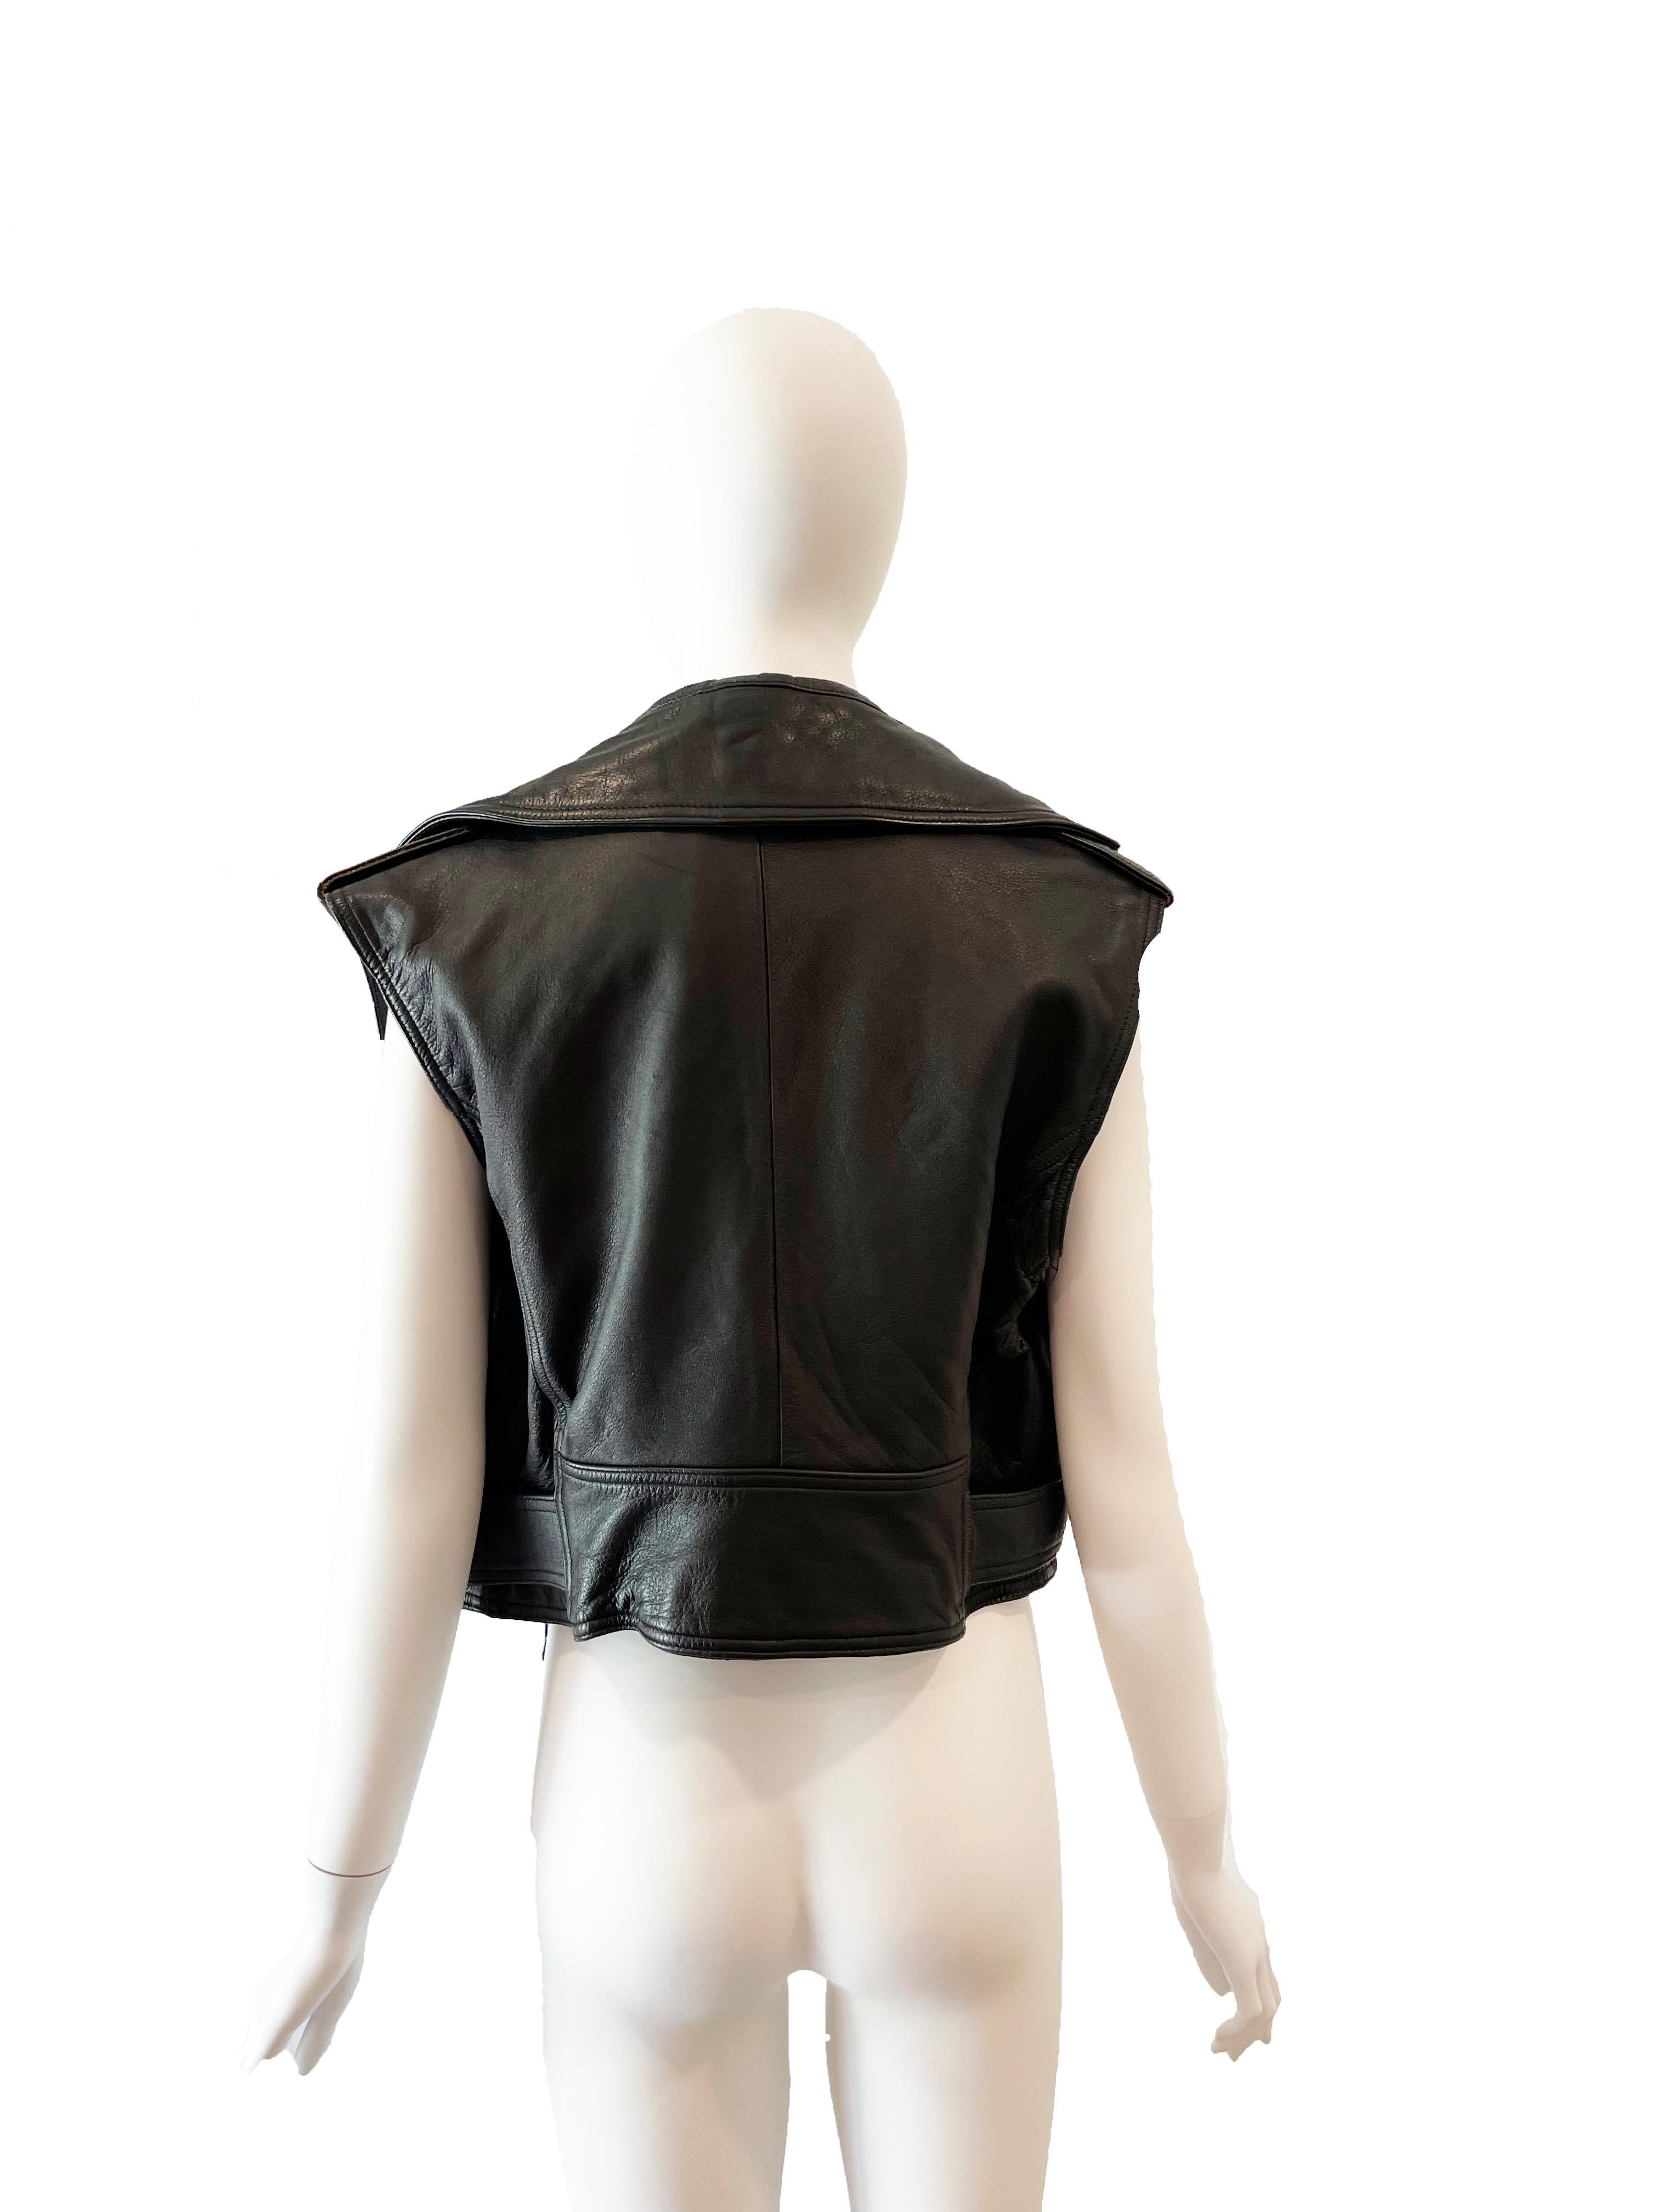 1990s Jean Paul Gaultier Sleeveless Leather Jacket
Condition: Good, all over wear
Size L 
42